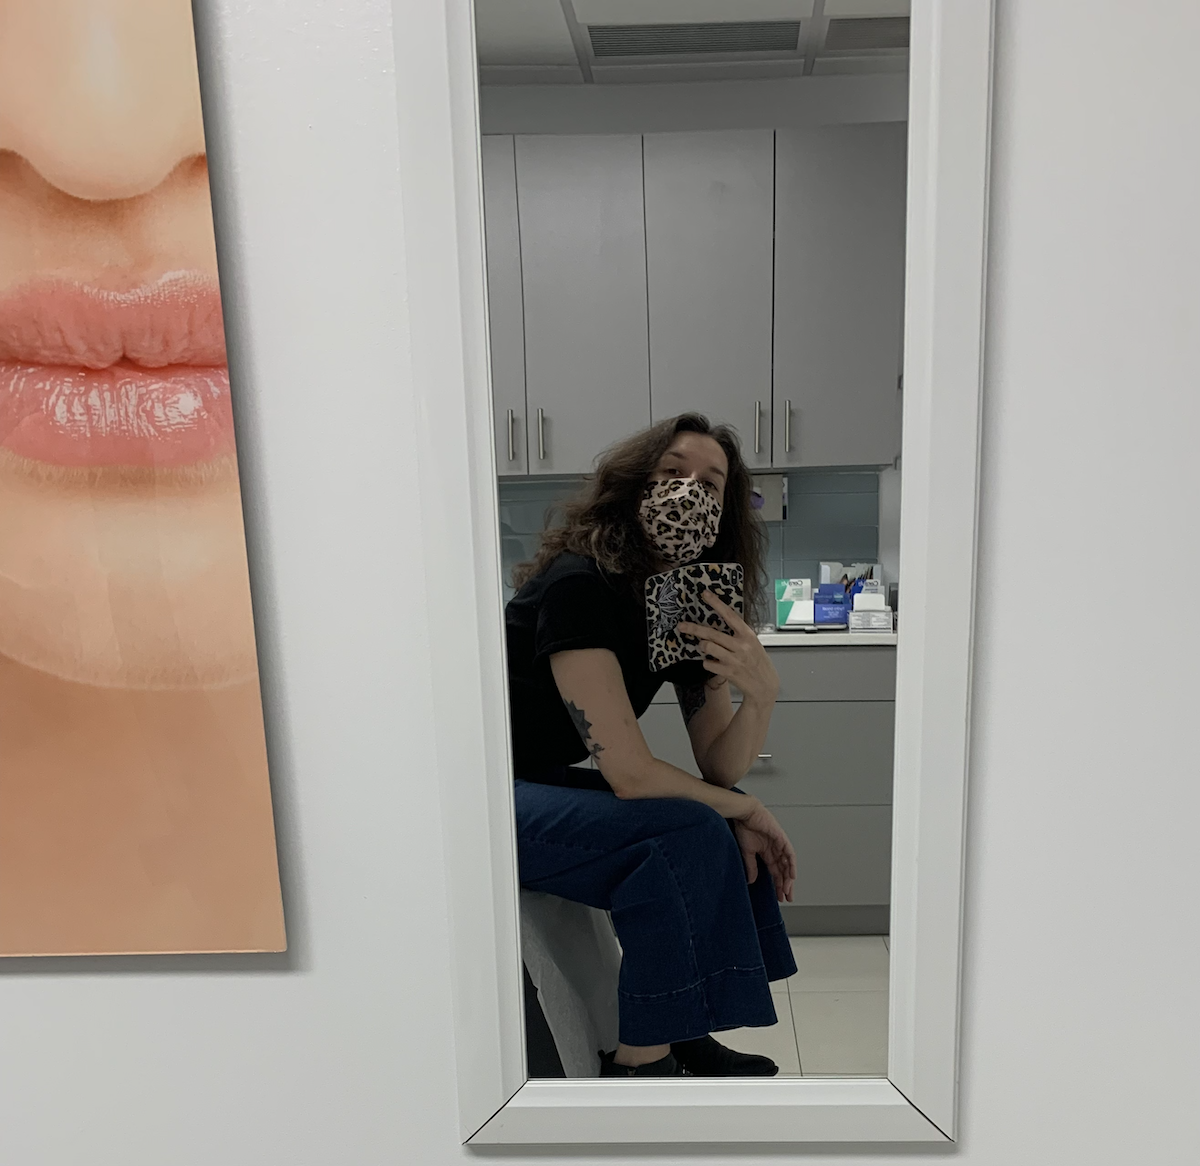 mirror selfie and i'm in a dermatologist office sitting in the patient chair and there's a stock image of a white woman with perfect skin and probably perfect hair lol